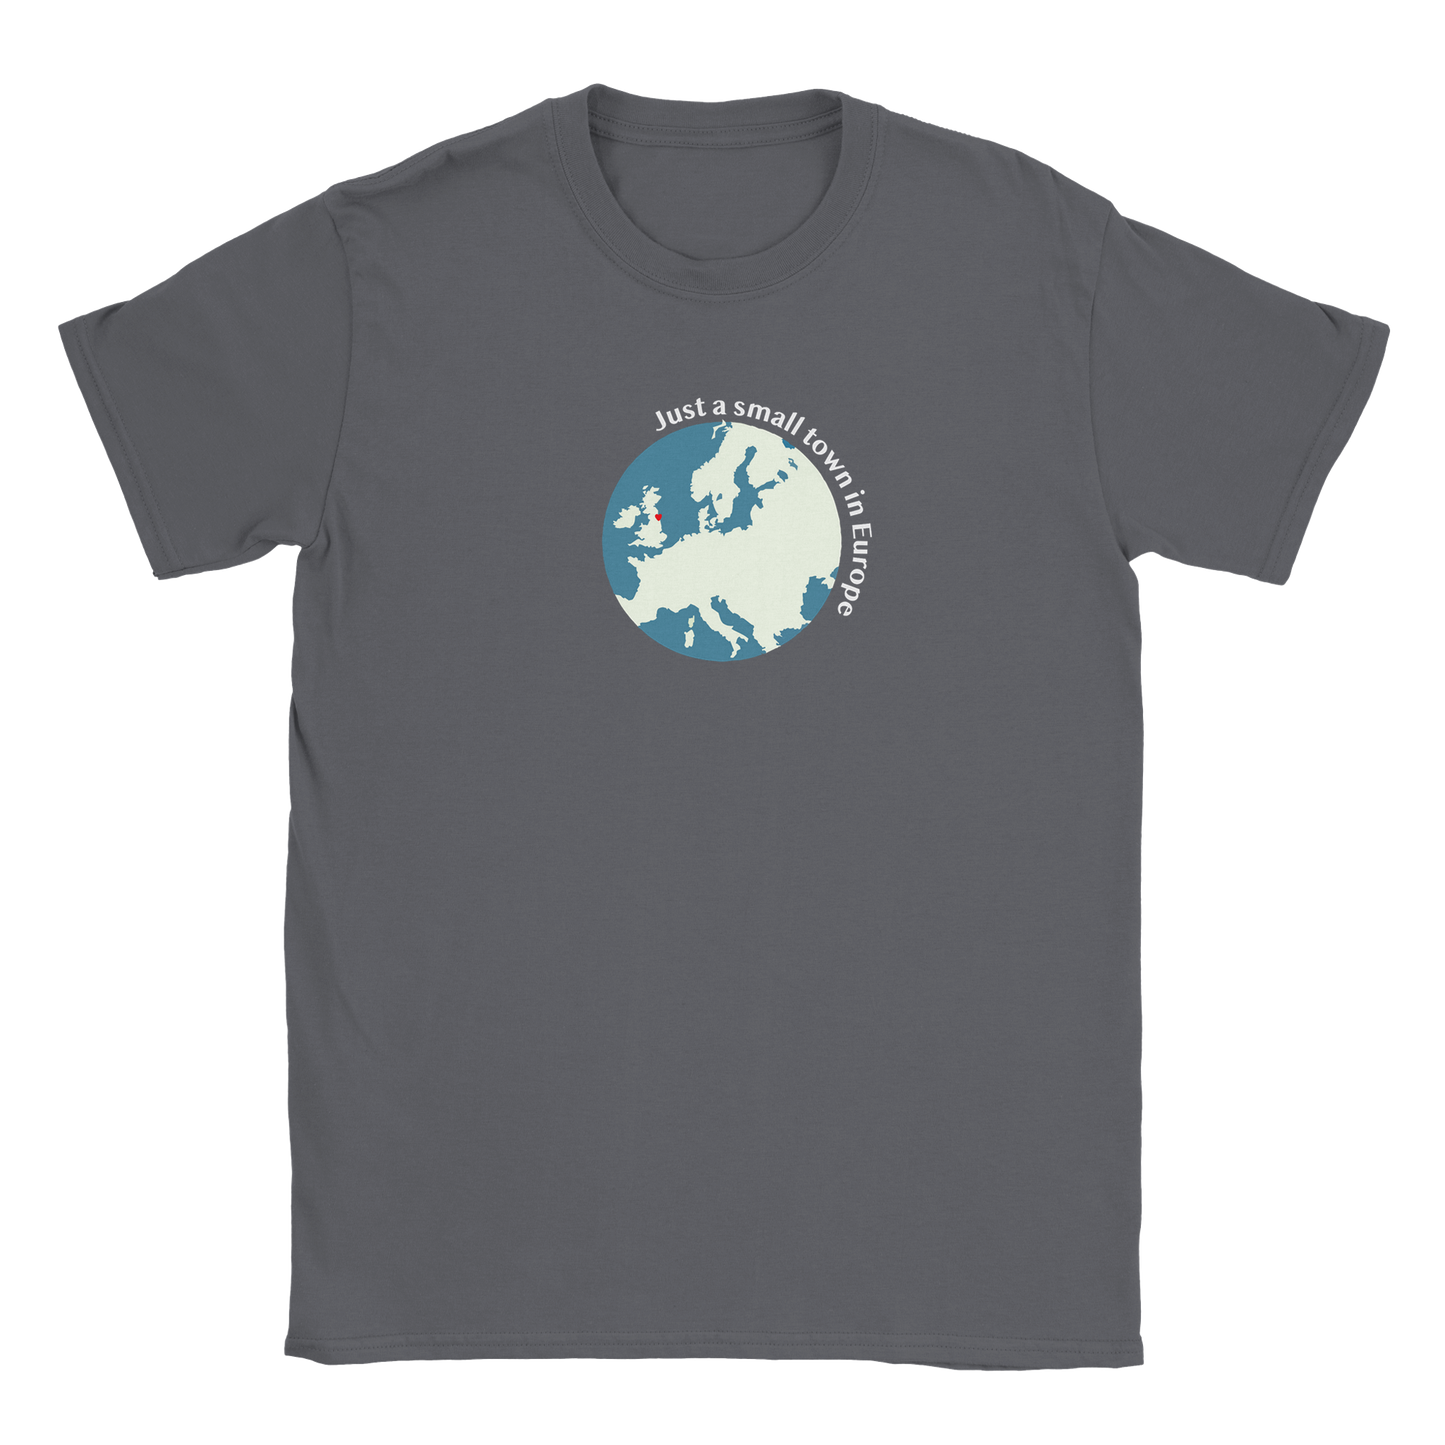 Just a small town in Europe T-shirt